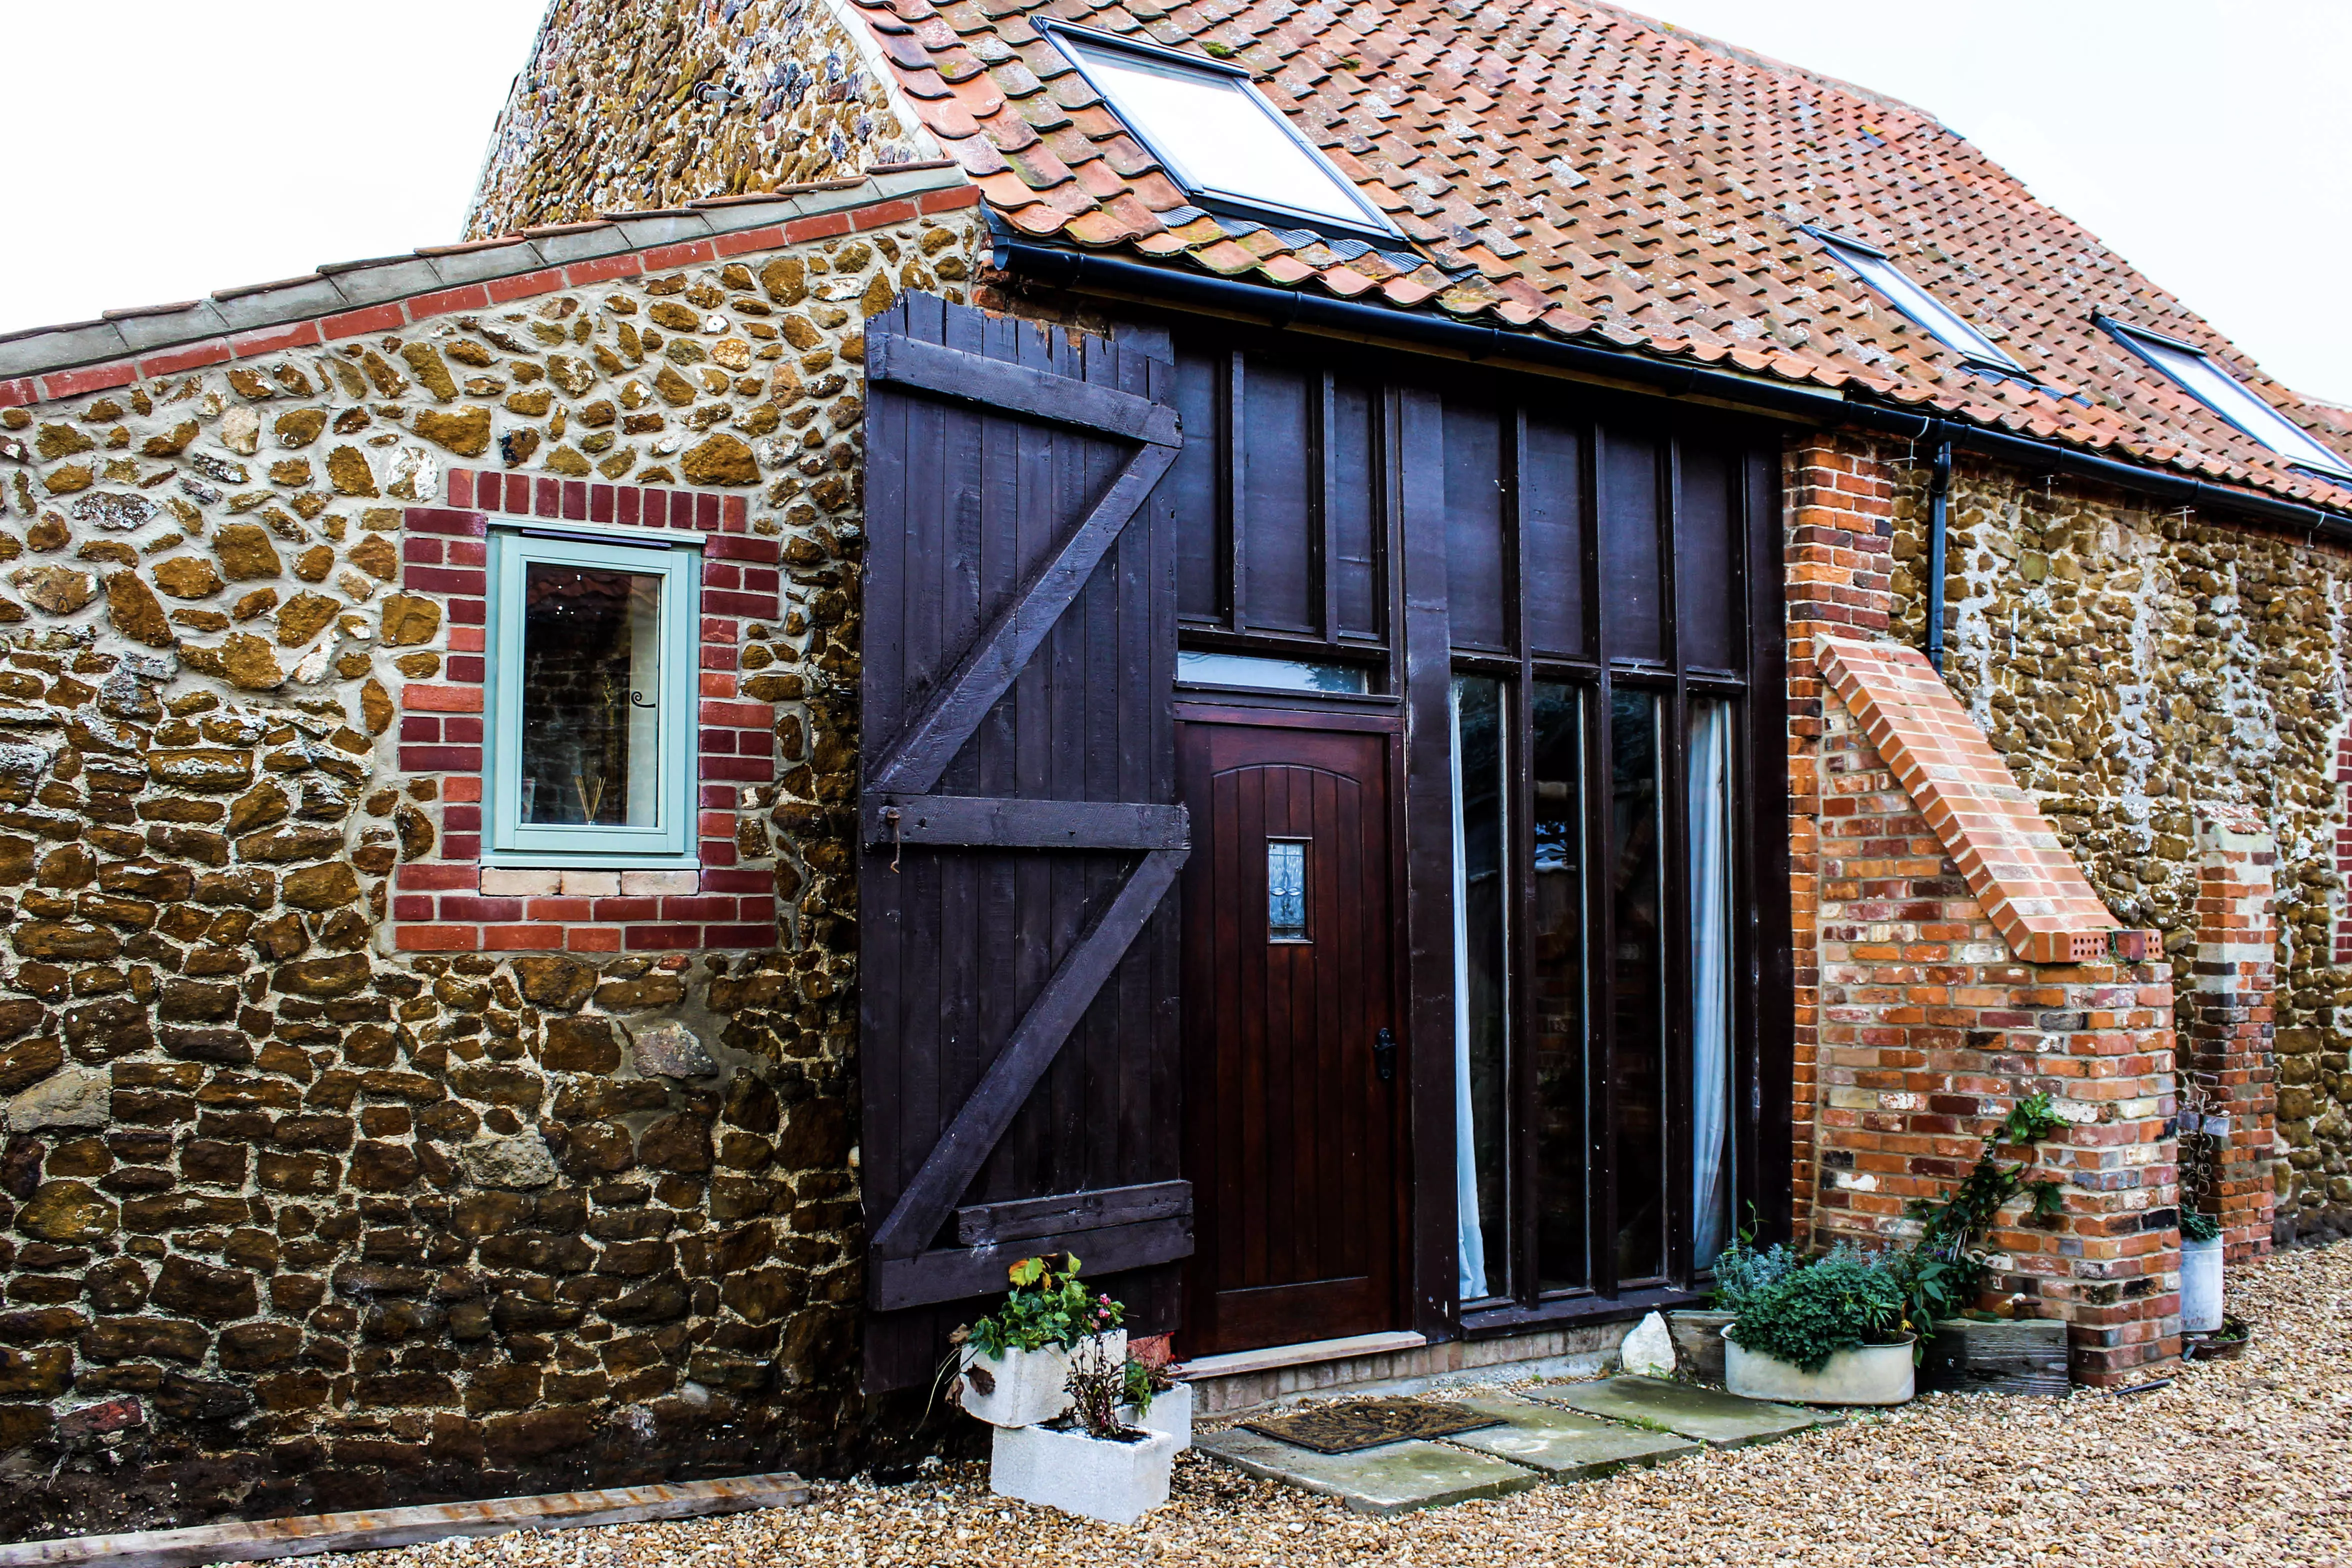 NORFOLK HOLIDAY ACCOMMODATION COTTAGE: THE OLD BARN